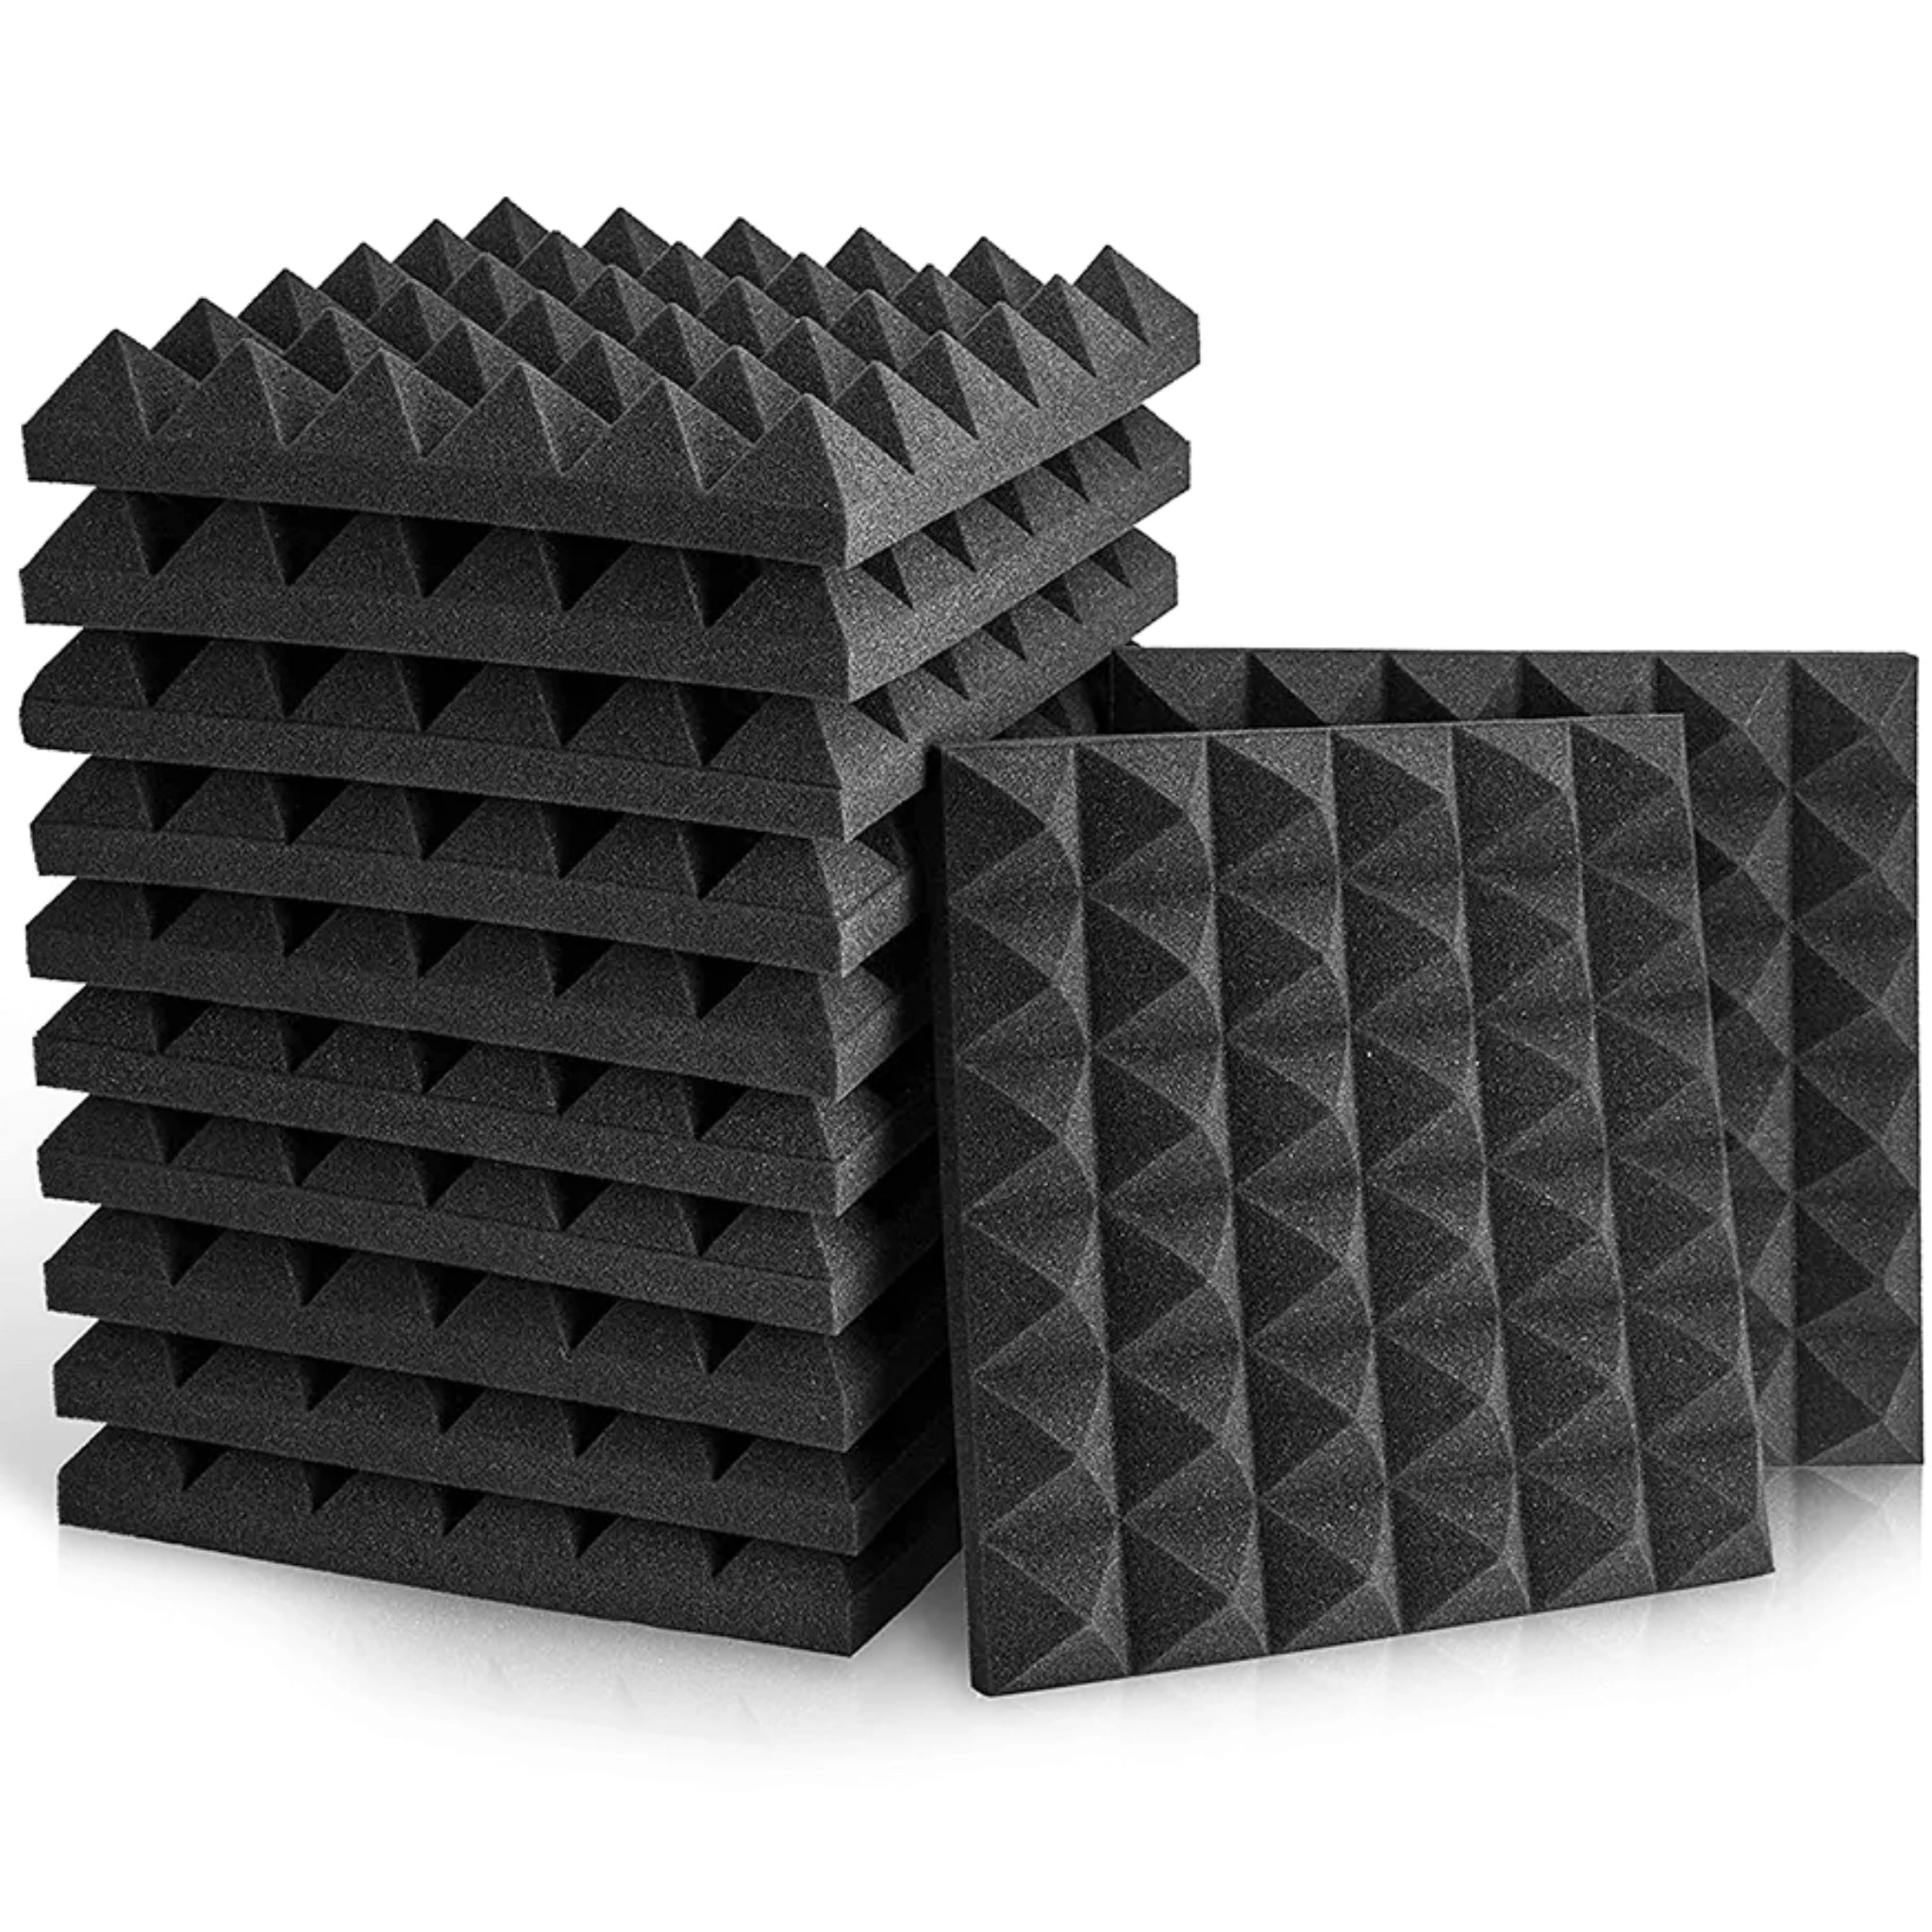 Stack of black acoustic foam panels for soundproofing